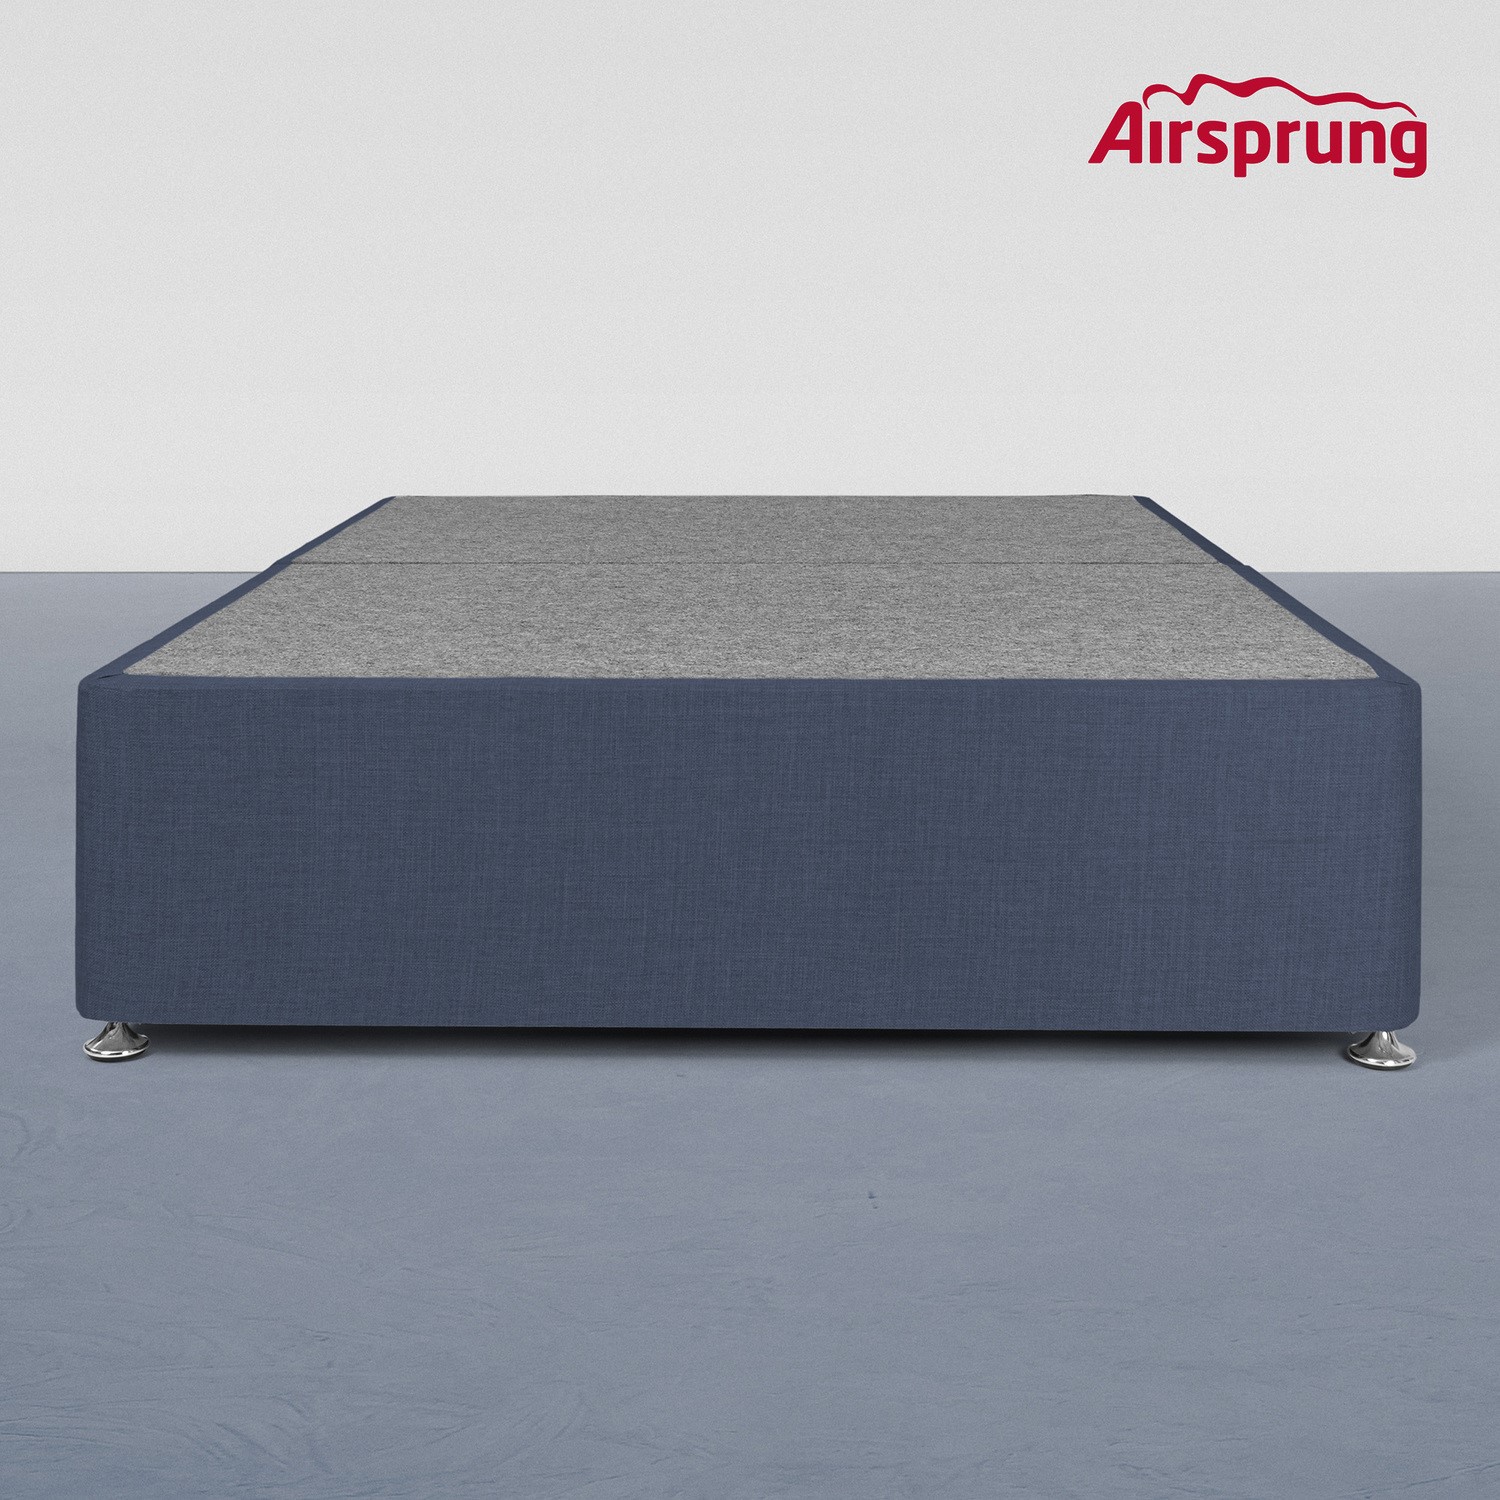 Read more about Airsprung kelston king size divan midnight blue